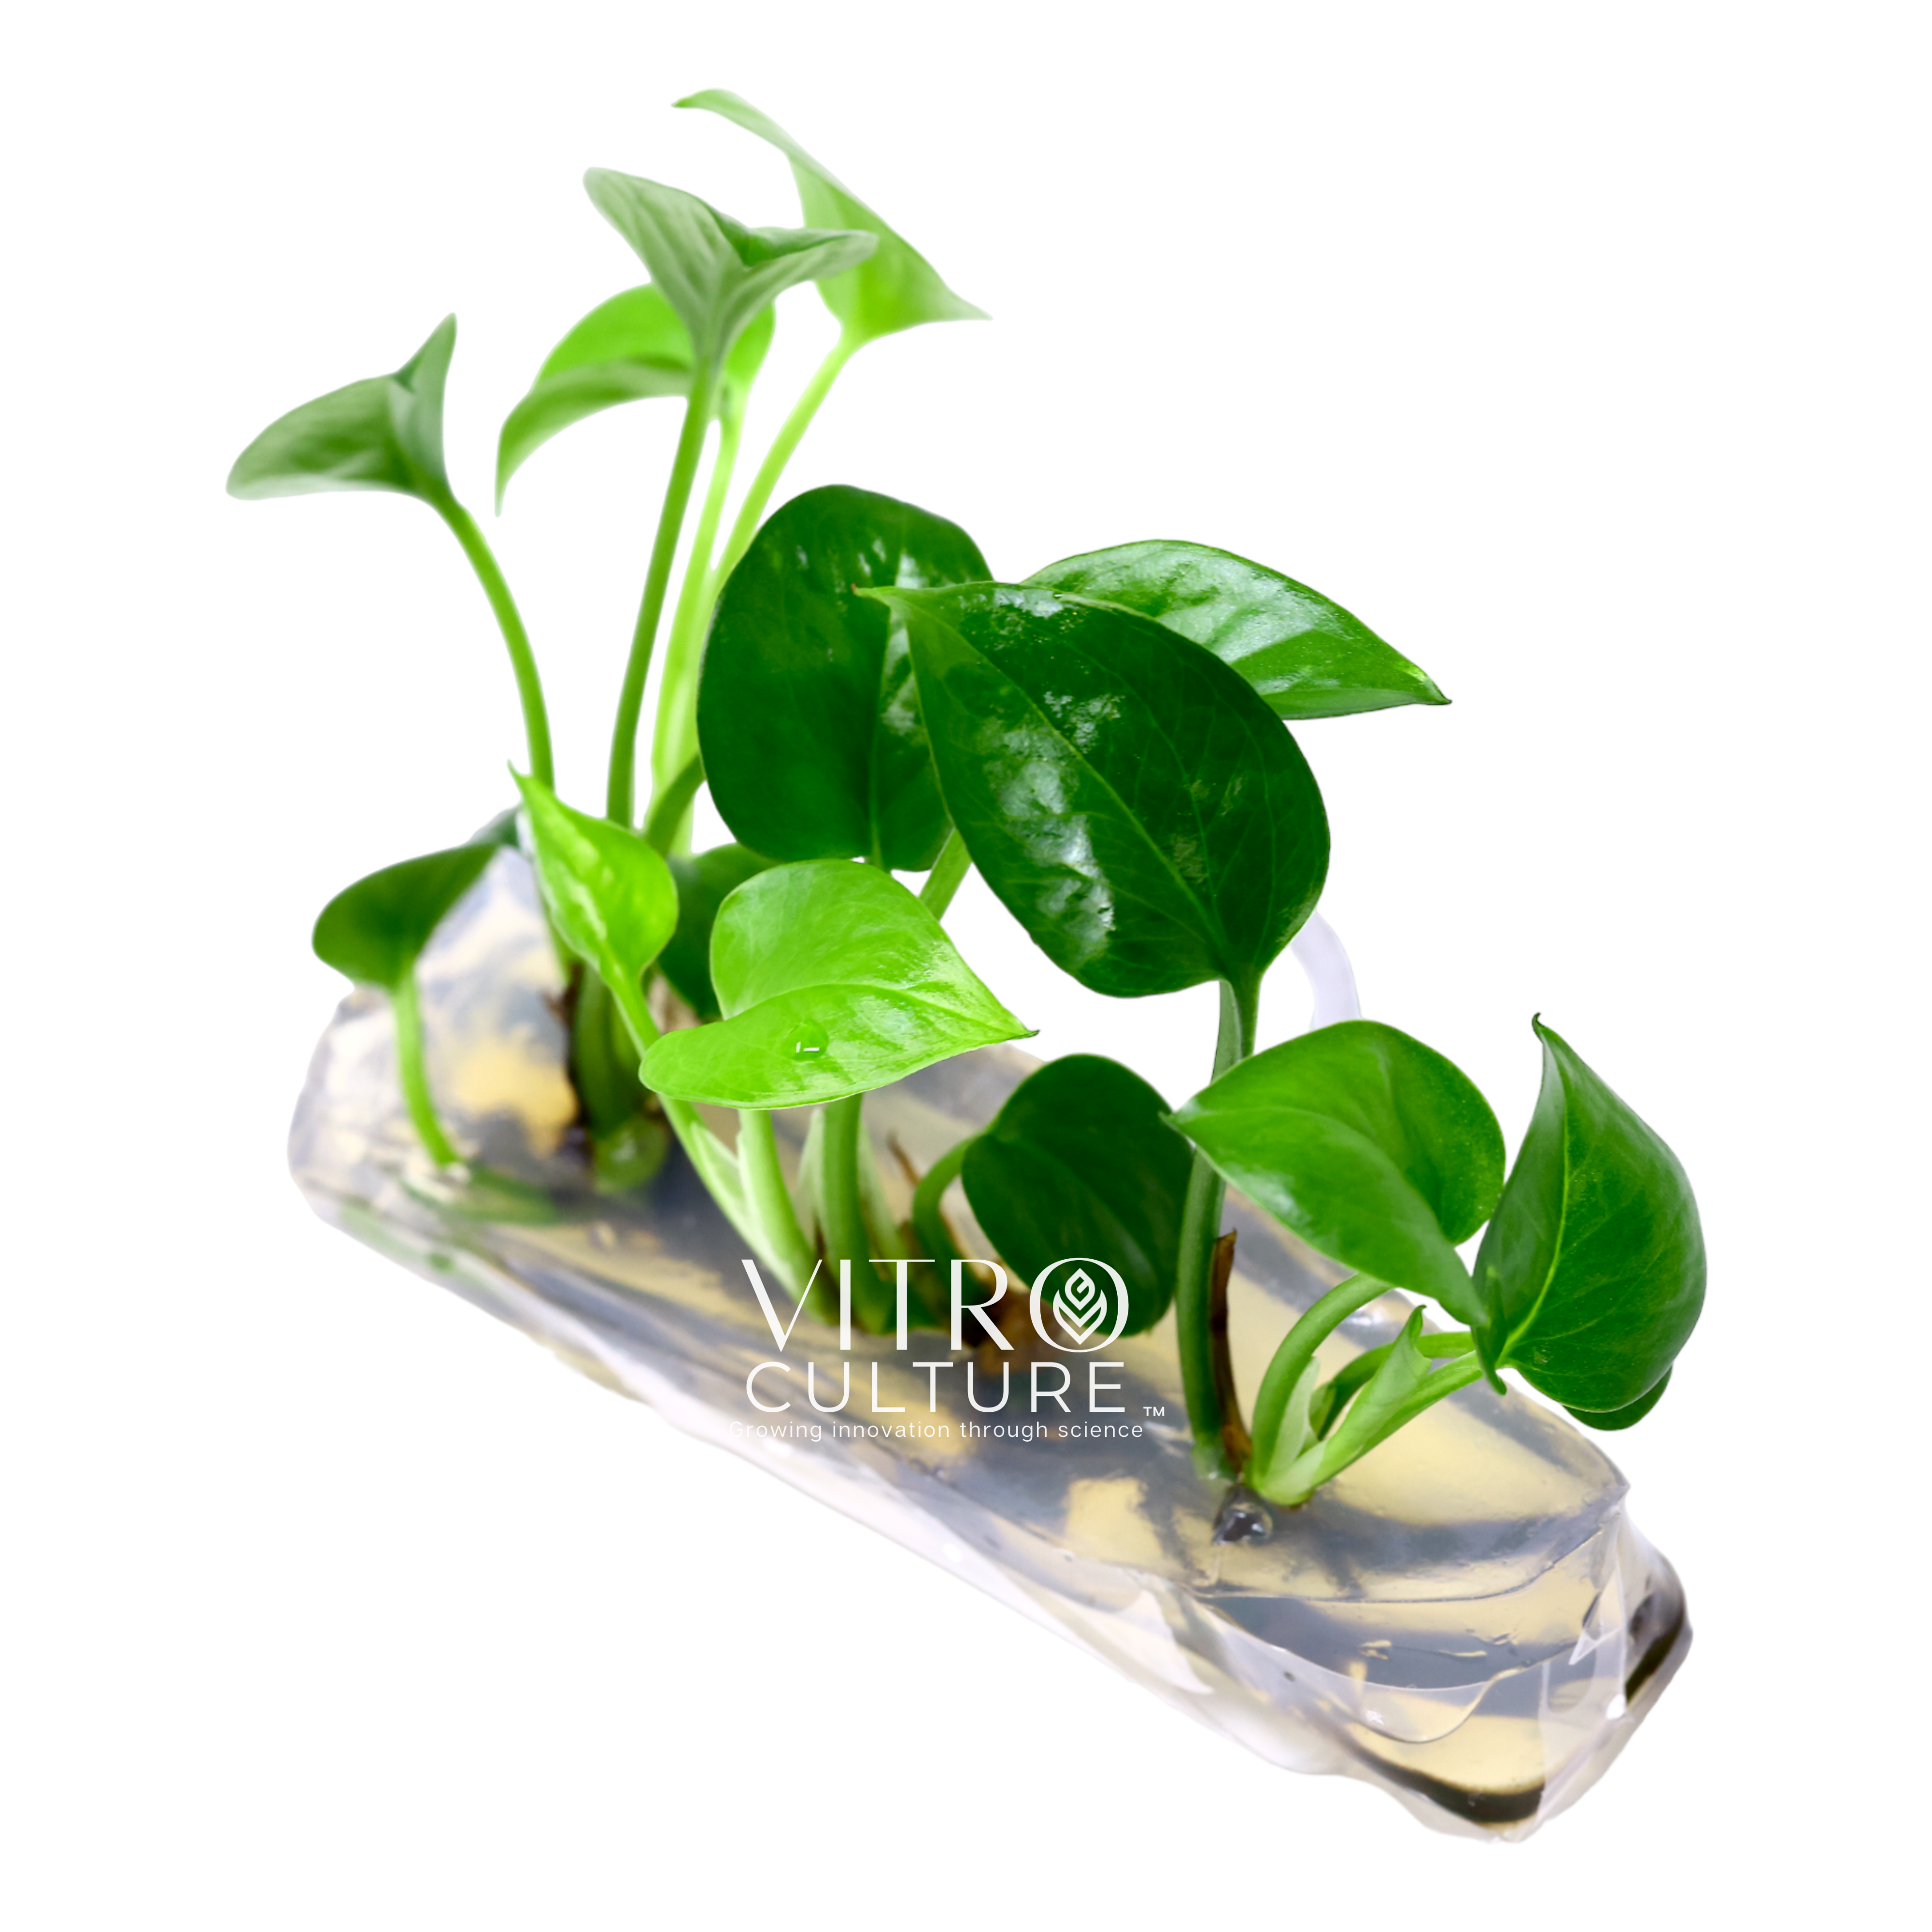 Like other varieties of pothos, jade pothos is known for its air-purifying qualities and is often used to help remove toxins from the air in indoor environments. It is also tolerant of low light levels and can thrive in a variety of indoor lighting conditions, making it a popular choice for offices and other low-light environments.